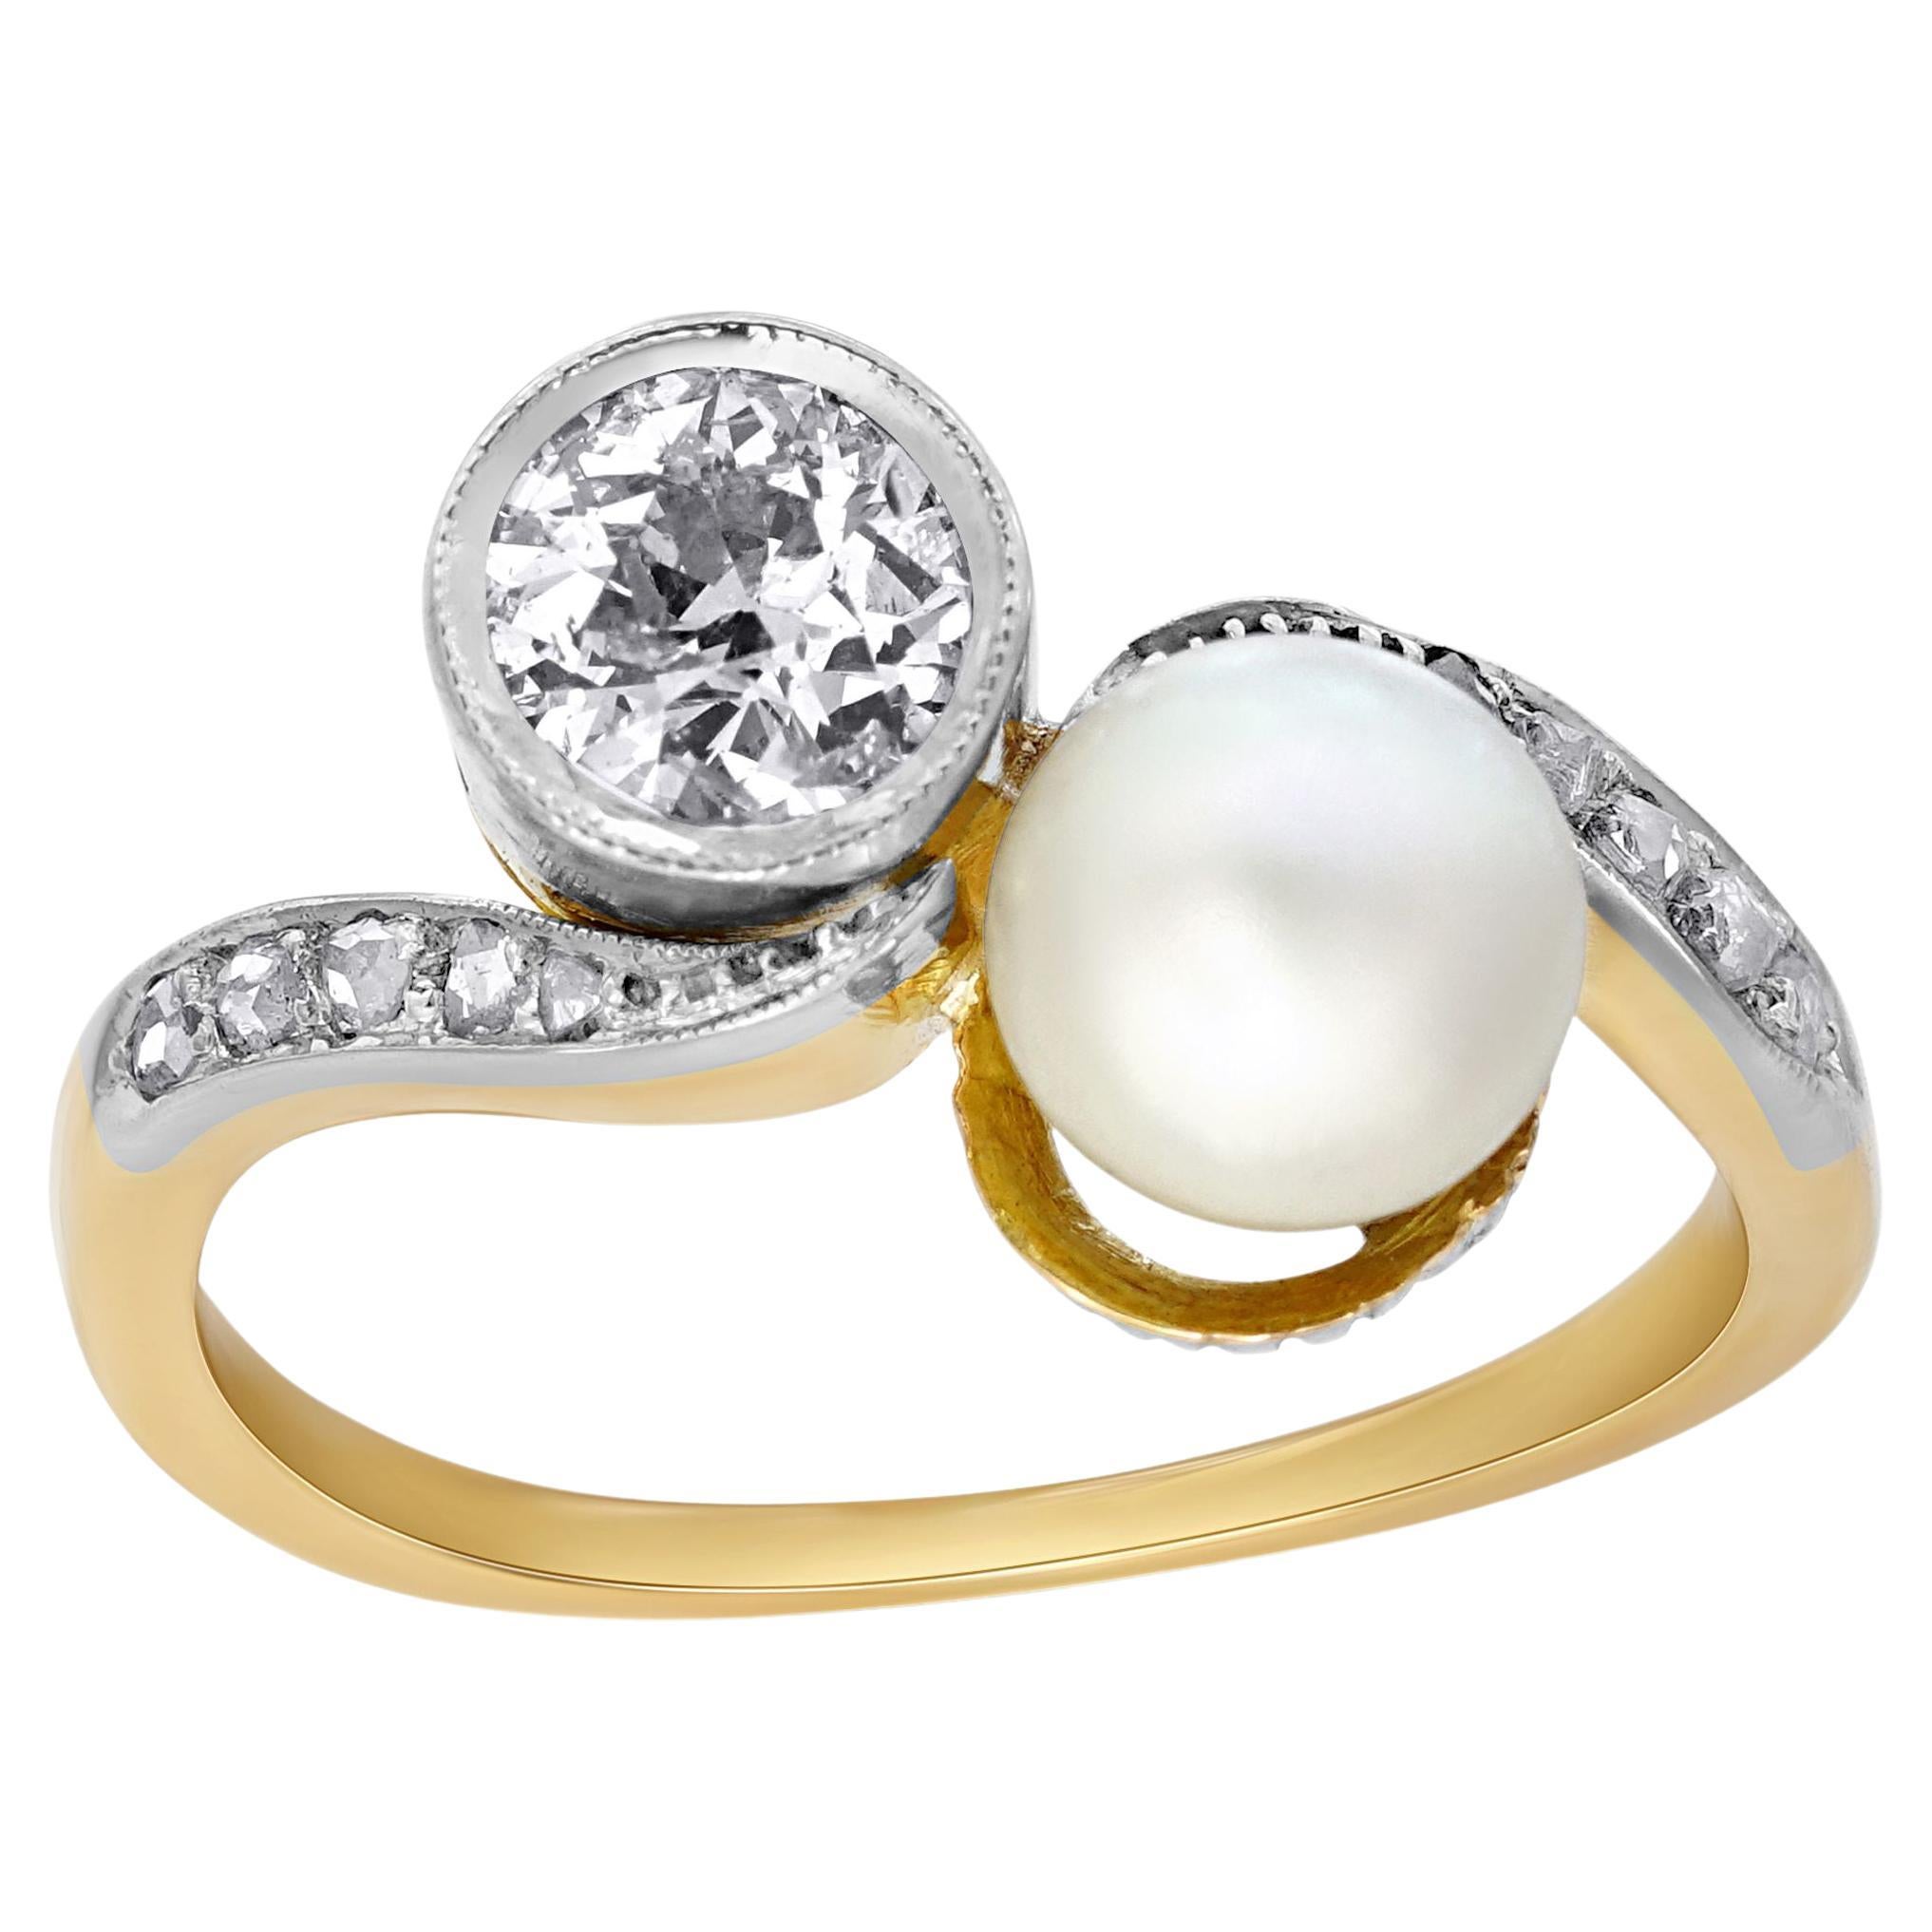 Simply Beautiful! Finely crafted Edwardian Diamond and Pearl 'Toi et Moi' Bypass 14k Gold Ring. Securely Hand set in Silver with an Old European-cut Diamond, weighing approx. 0.15 Carat and a 6mm Pearl; accented by Diamonds on either side of shank.